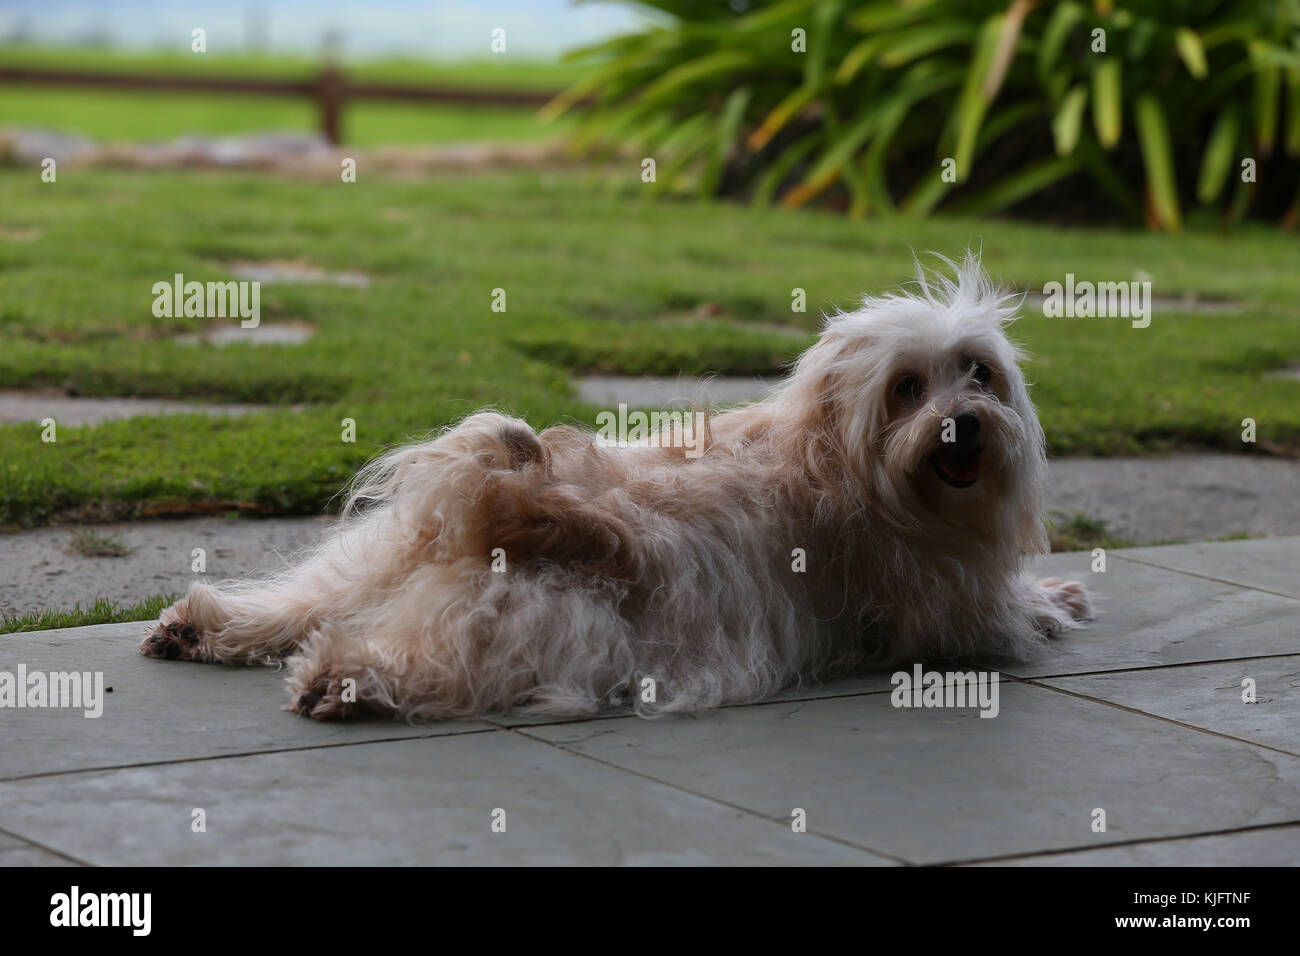 Havanese Bichon Havanais Havana Silk Dog lying on paving stones with back legs out behind looking back at the camera panting Stock Photo